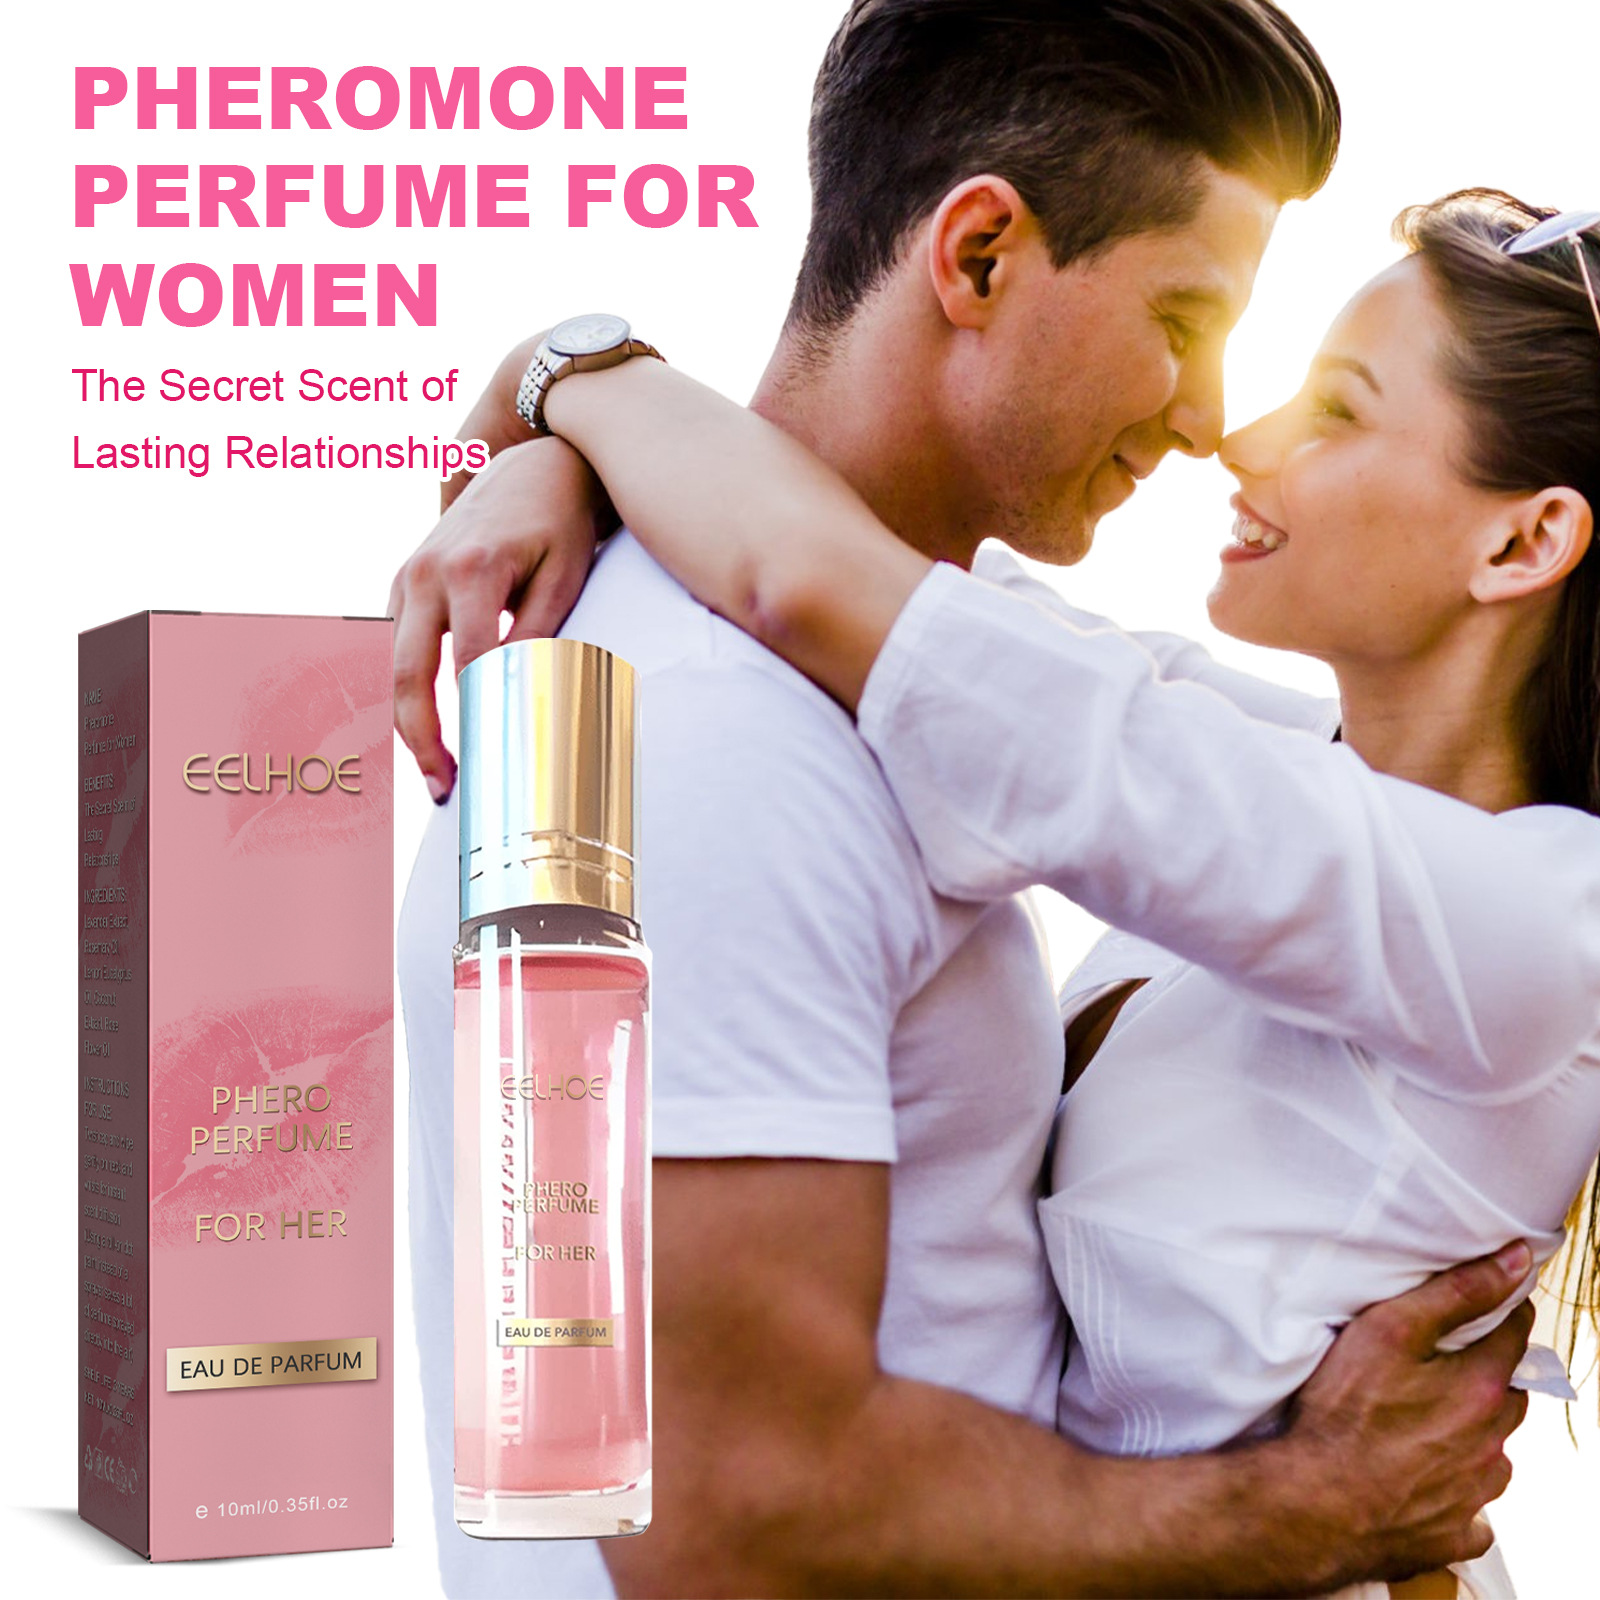 (Last Day Promotion - 50% OFF) Pheromone Perfume💕BUY 1 GET 1 FREE TODAY